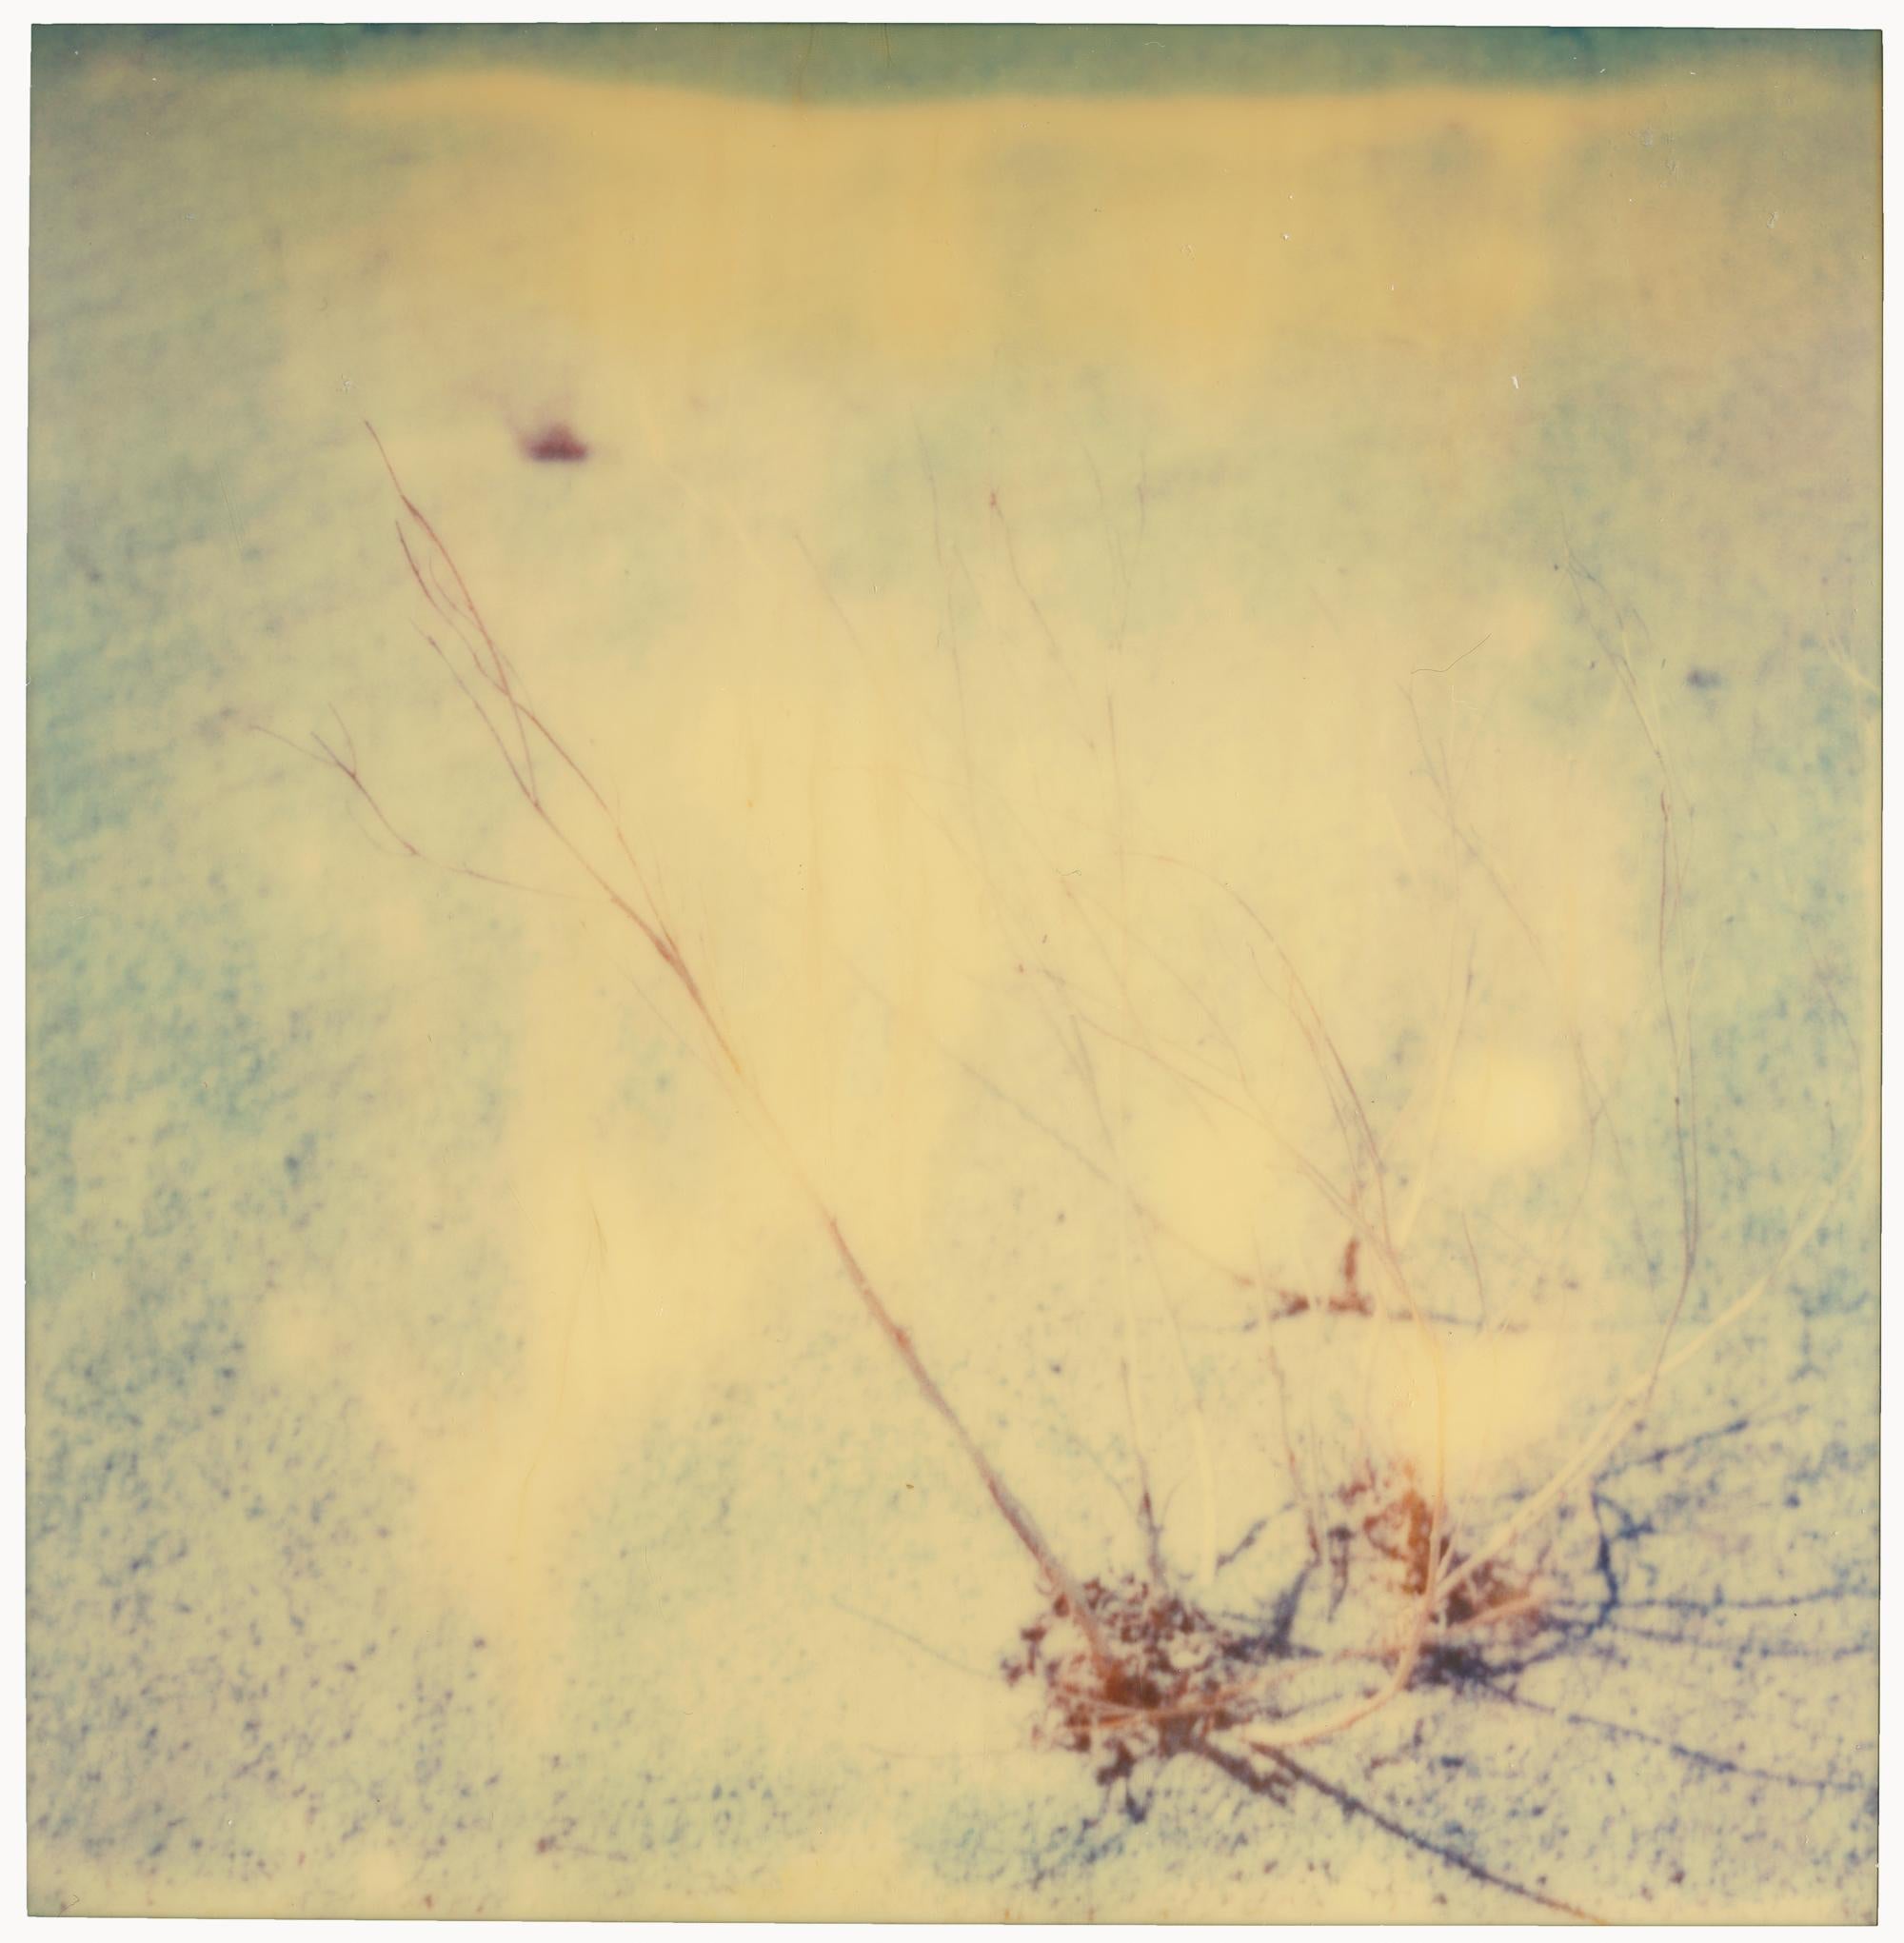 Flora - Planet of the Apes 08 - 21st Century, Polaroid, Abstract